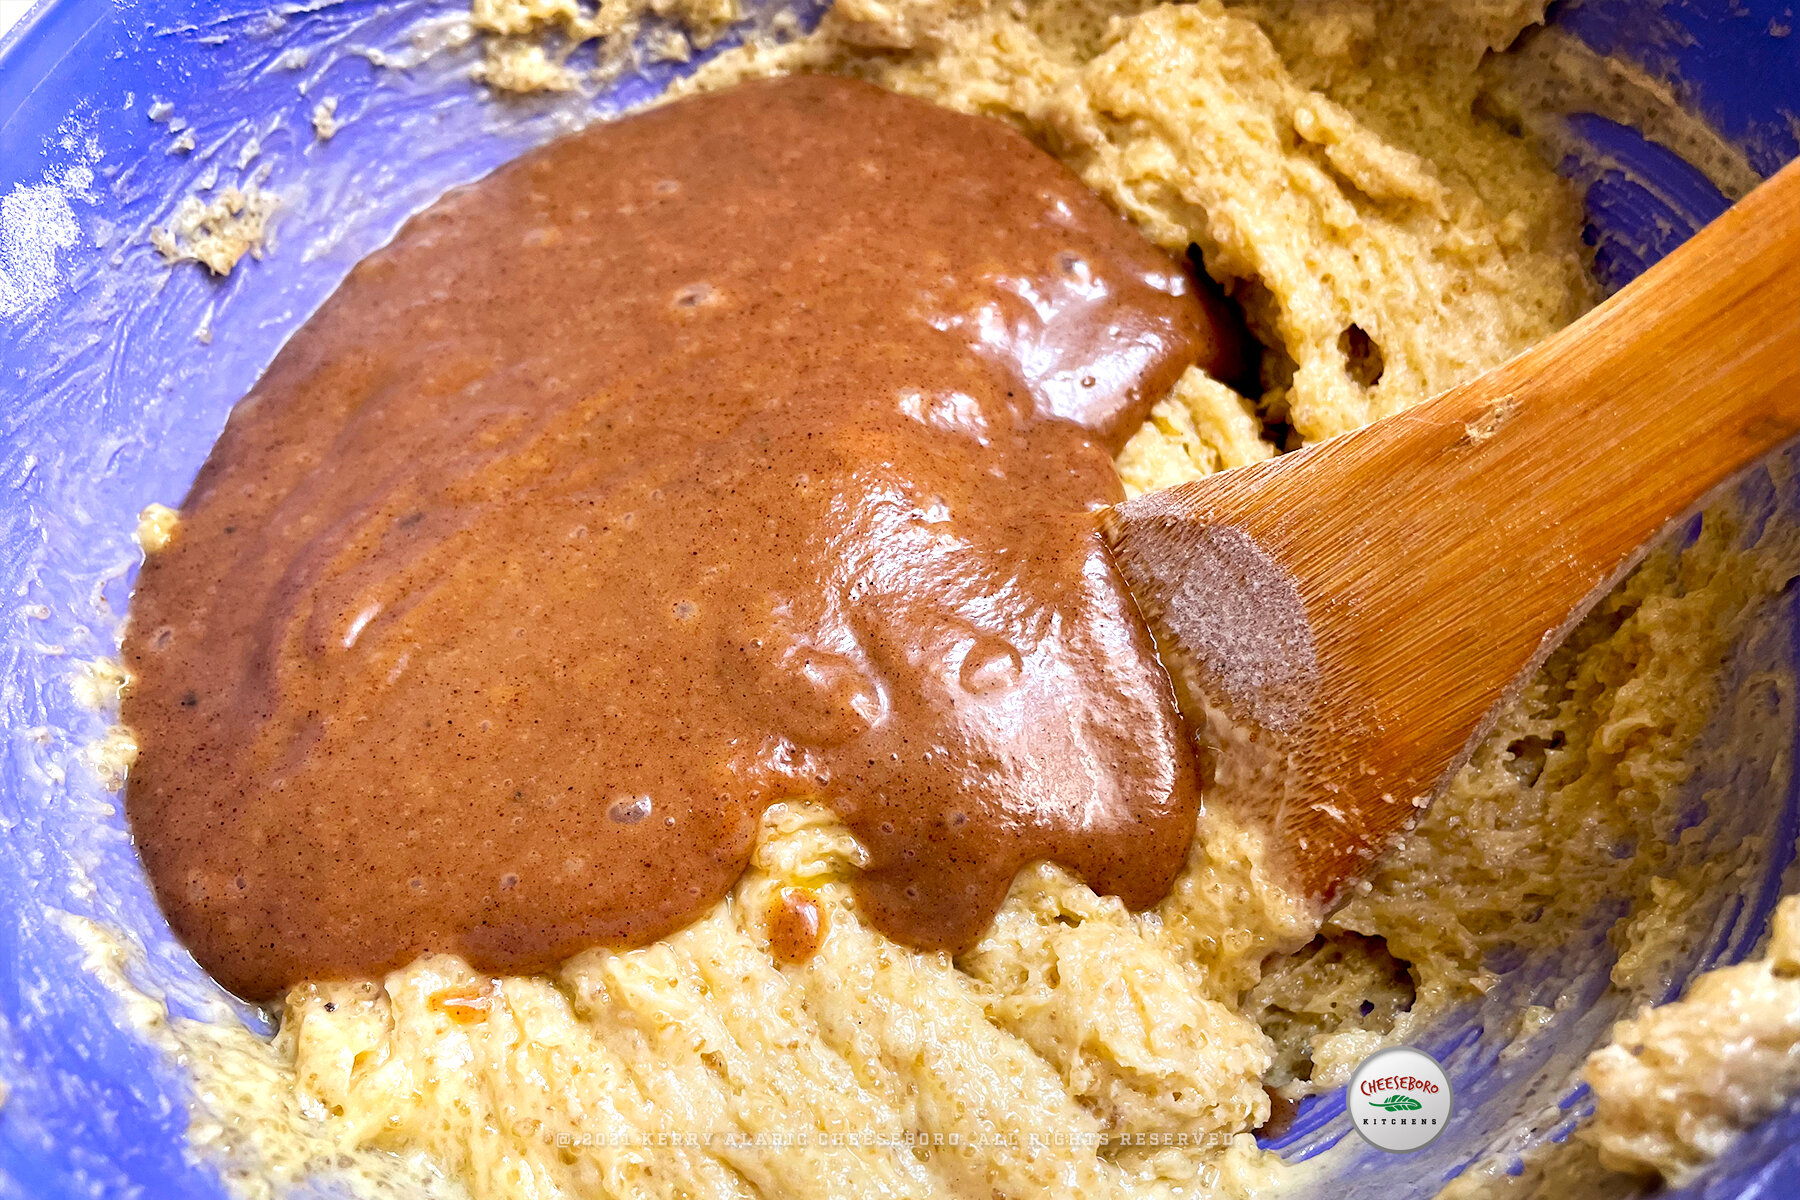 cheeskitch-210730-bananies-caramelized-into-batter-1-1800-hor.jpg